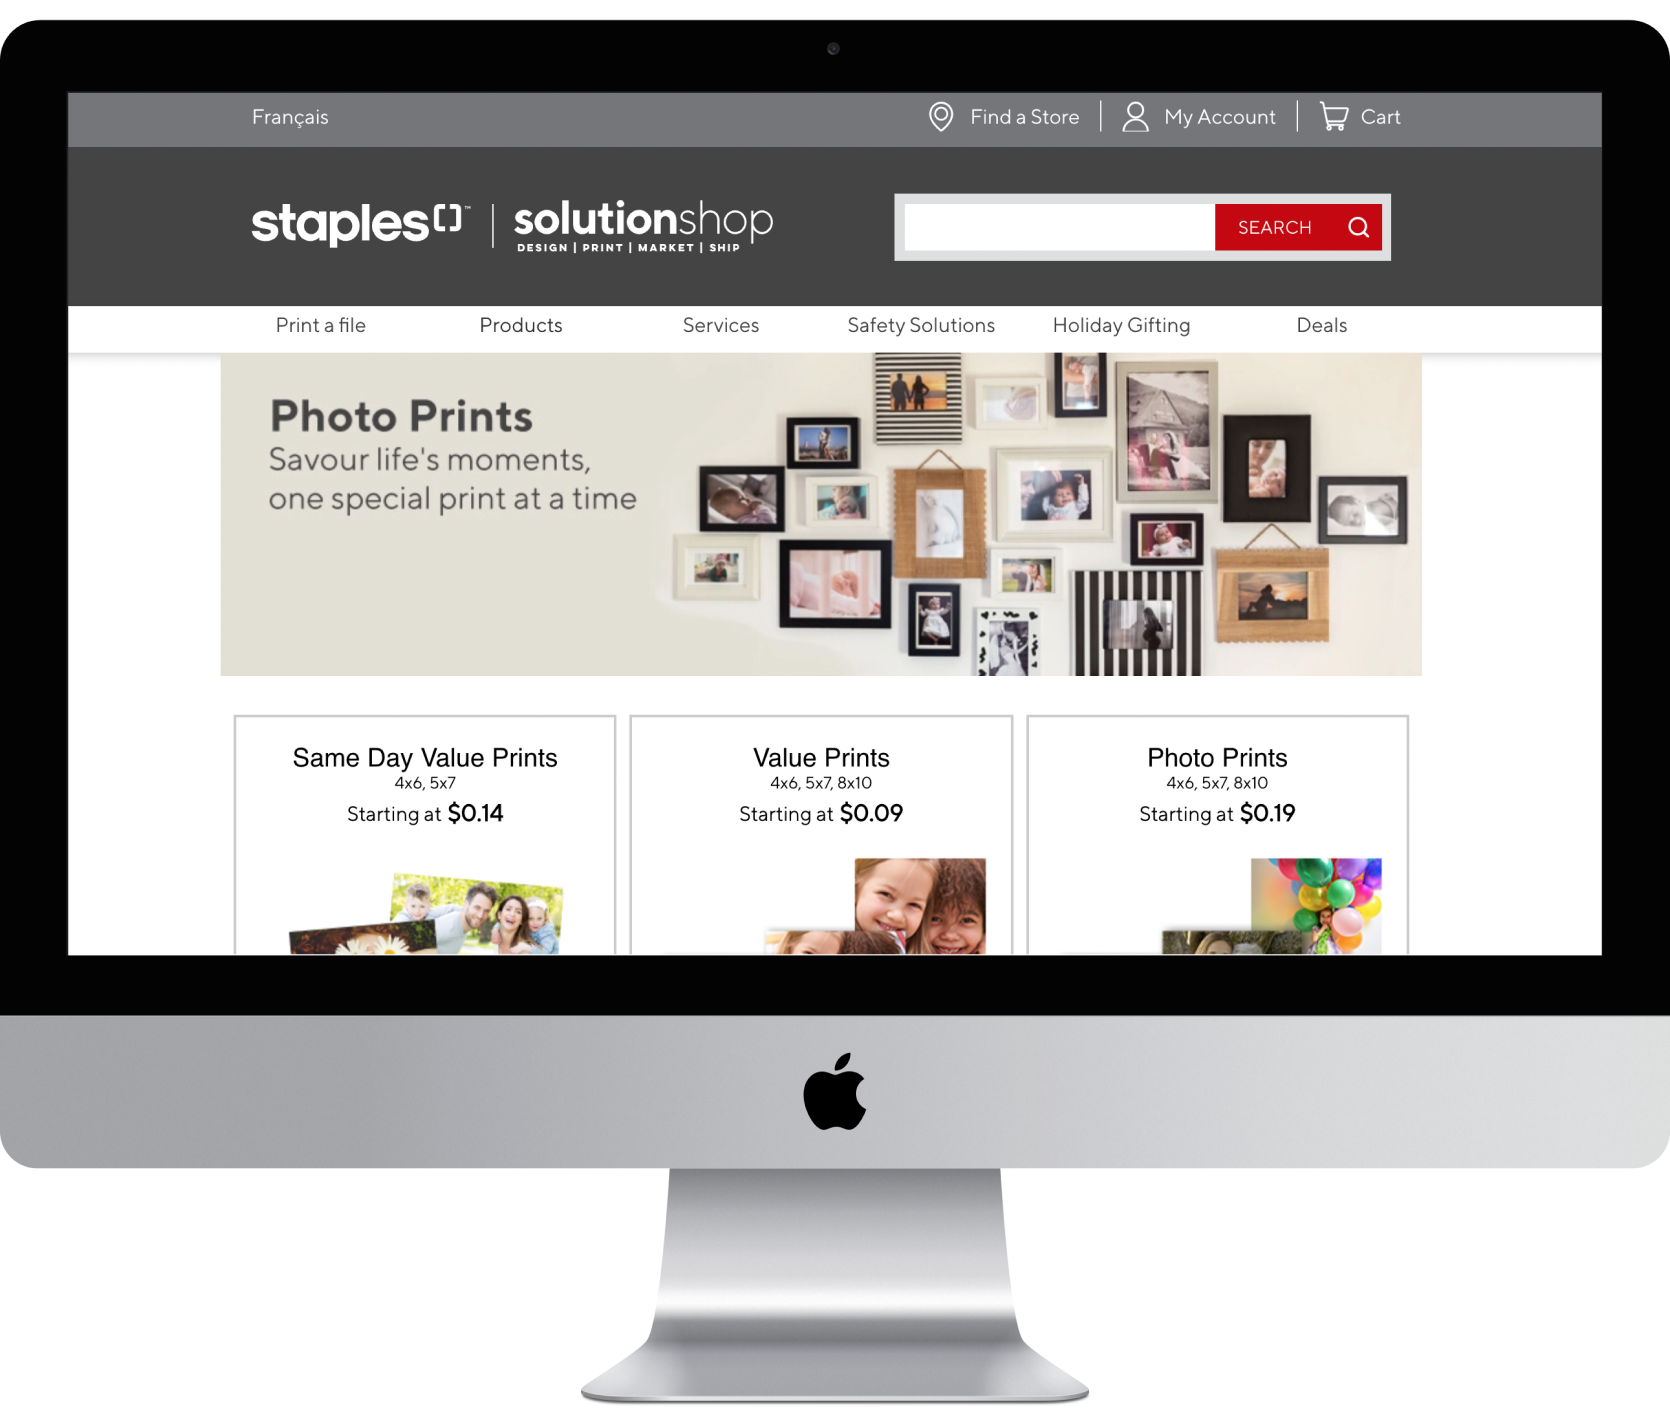 Staples / Solutionshop - A heuristic evaluation and proposed redesign changes of the picture printing experience.